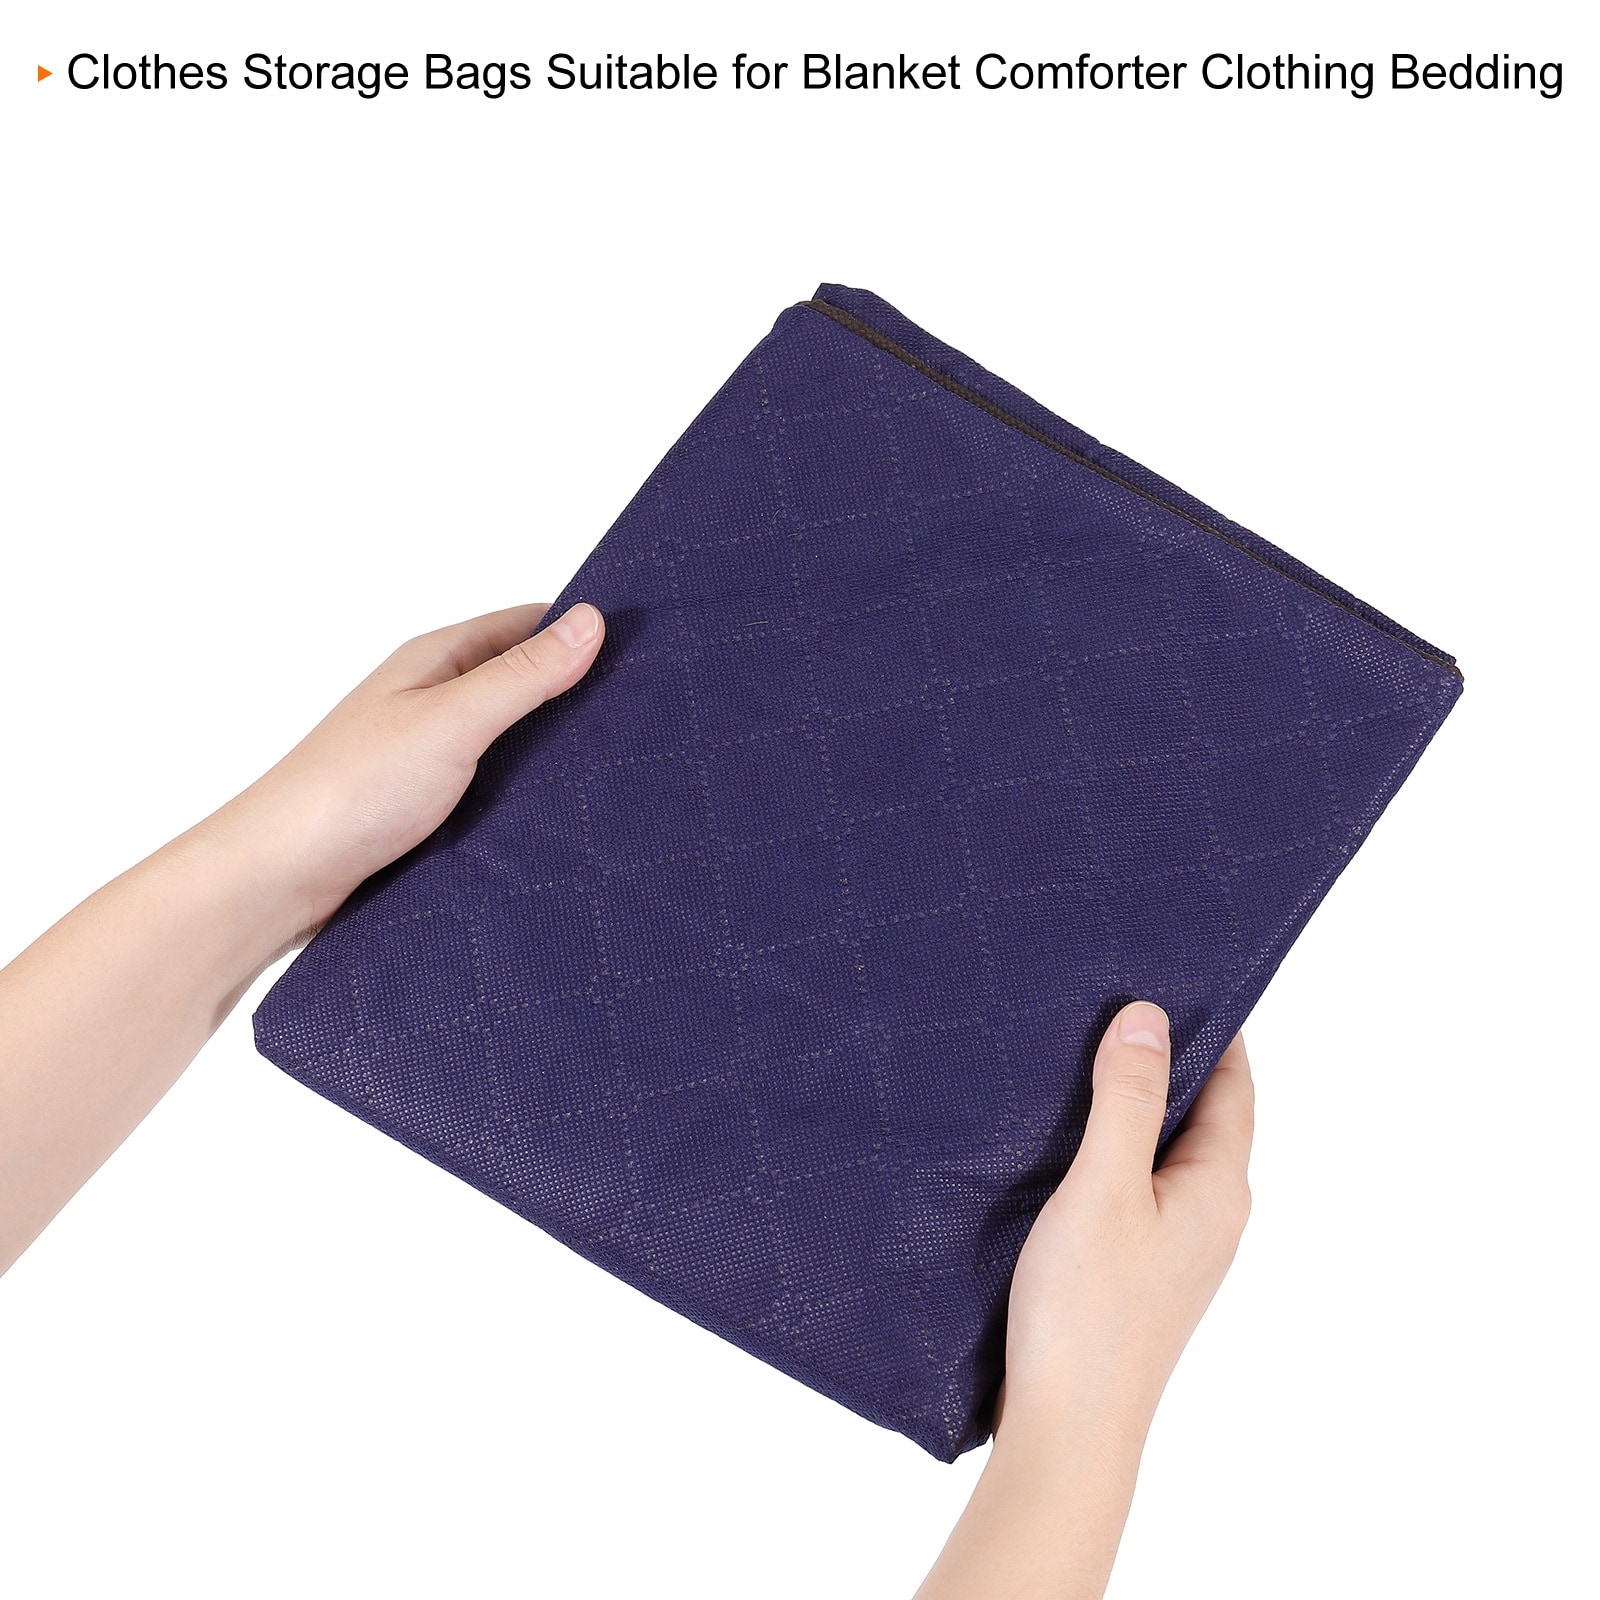 https://ak1.ostkcdn.com/images/products/is/images/direct/4479c18f816293ef24c3bf5f12dbe88734bf7d5c/Clothes-Storage-Bags-Comforters-Blanket-Closet-Boxes-Organizer-Grey-4pcs.jpg